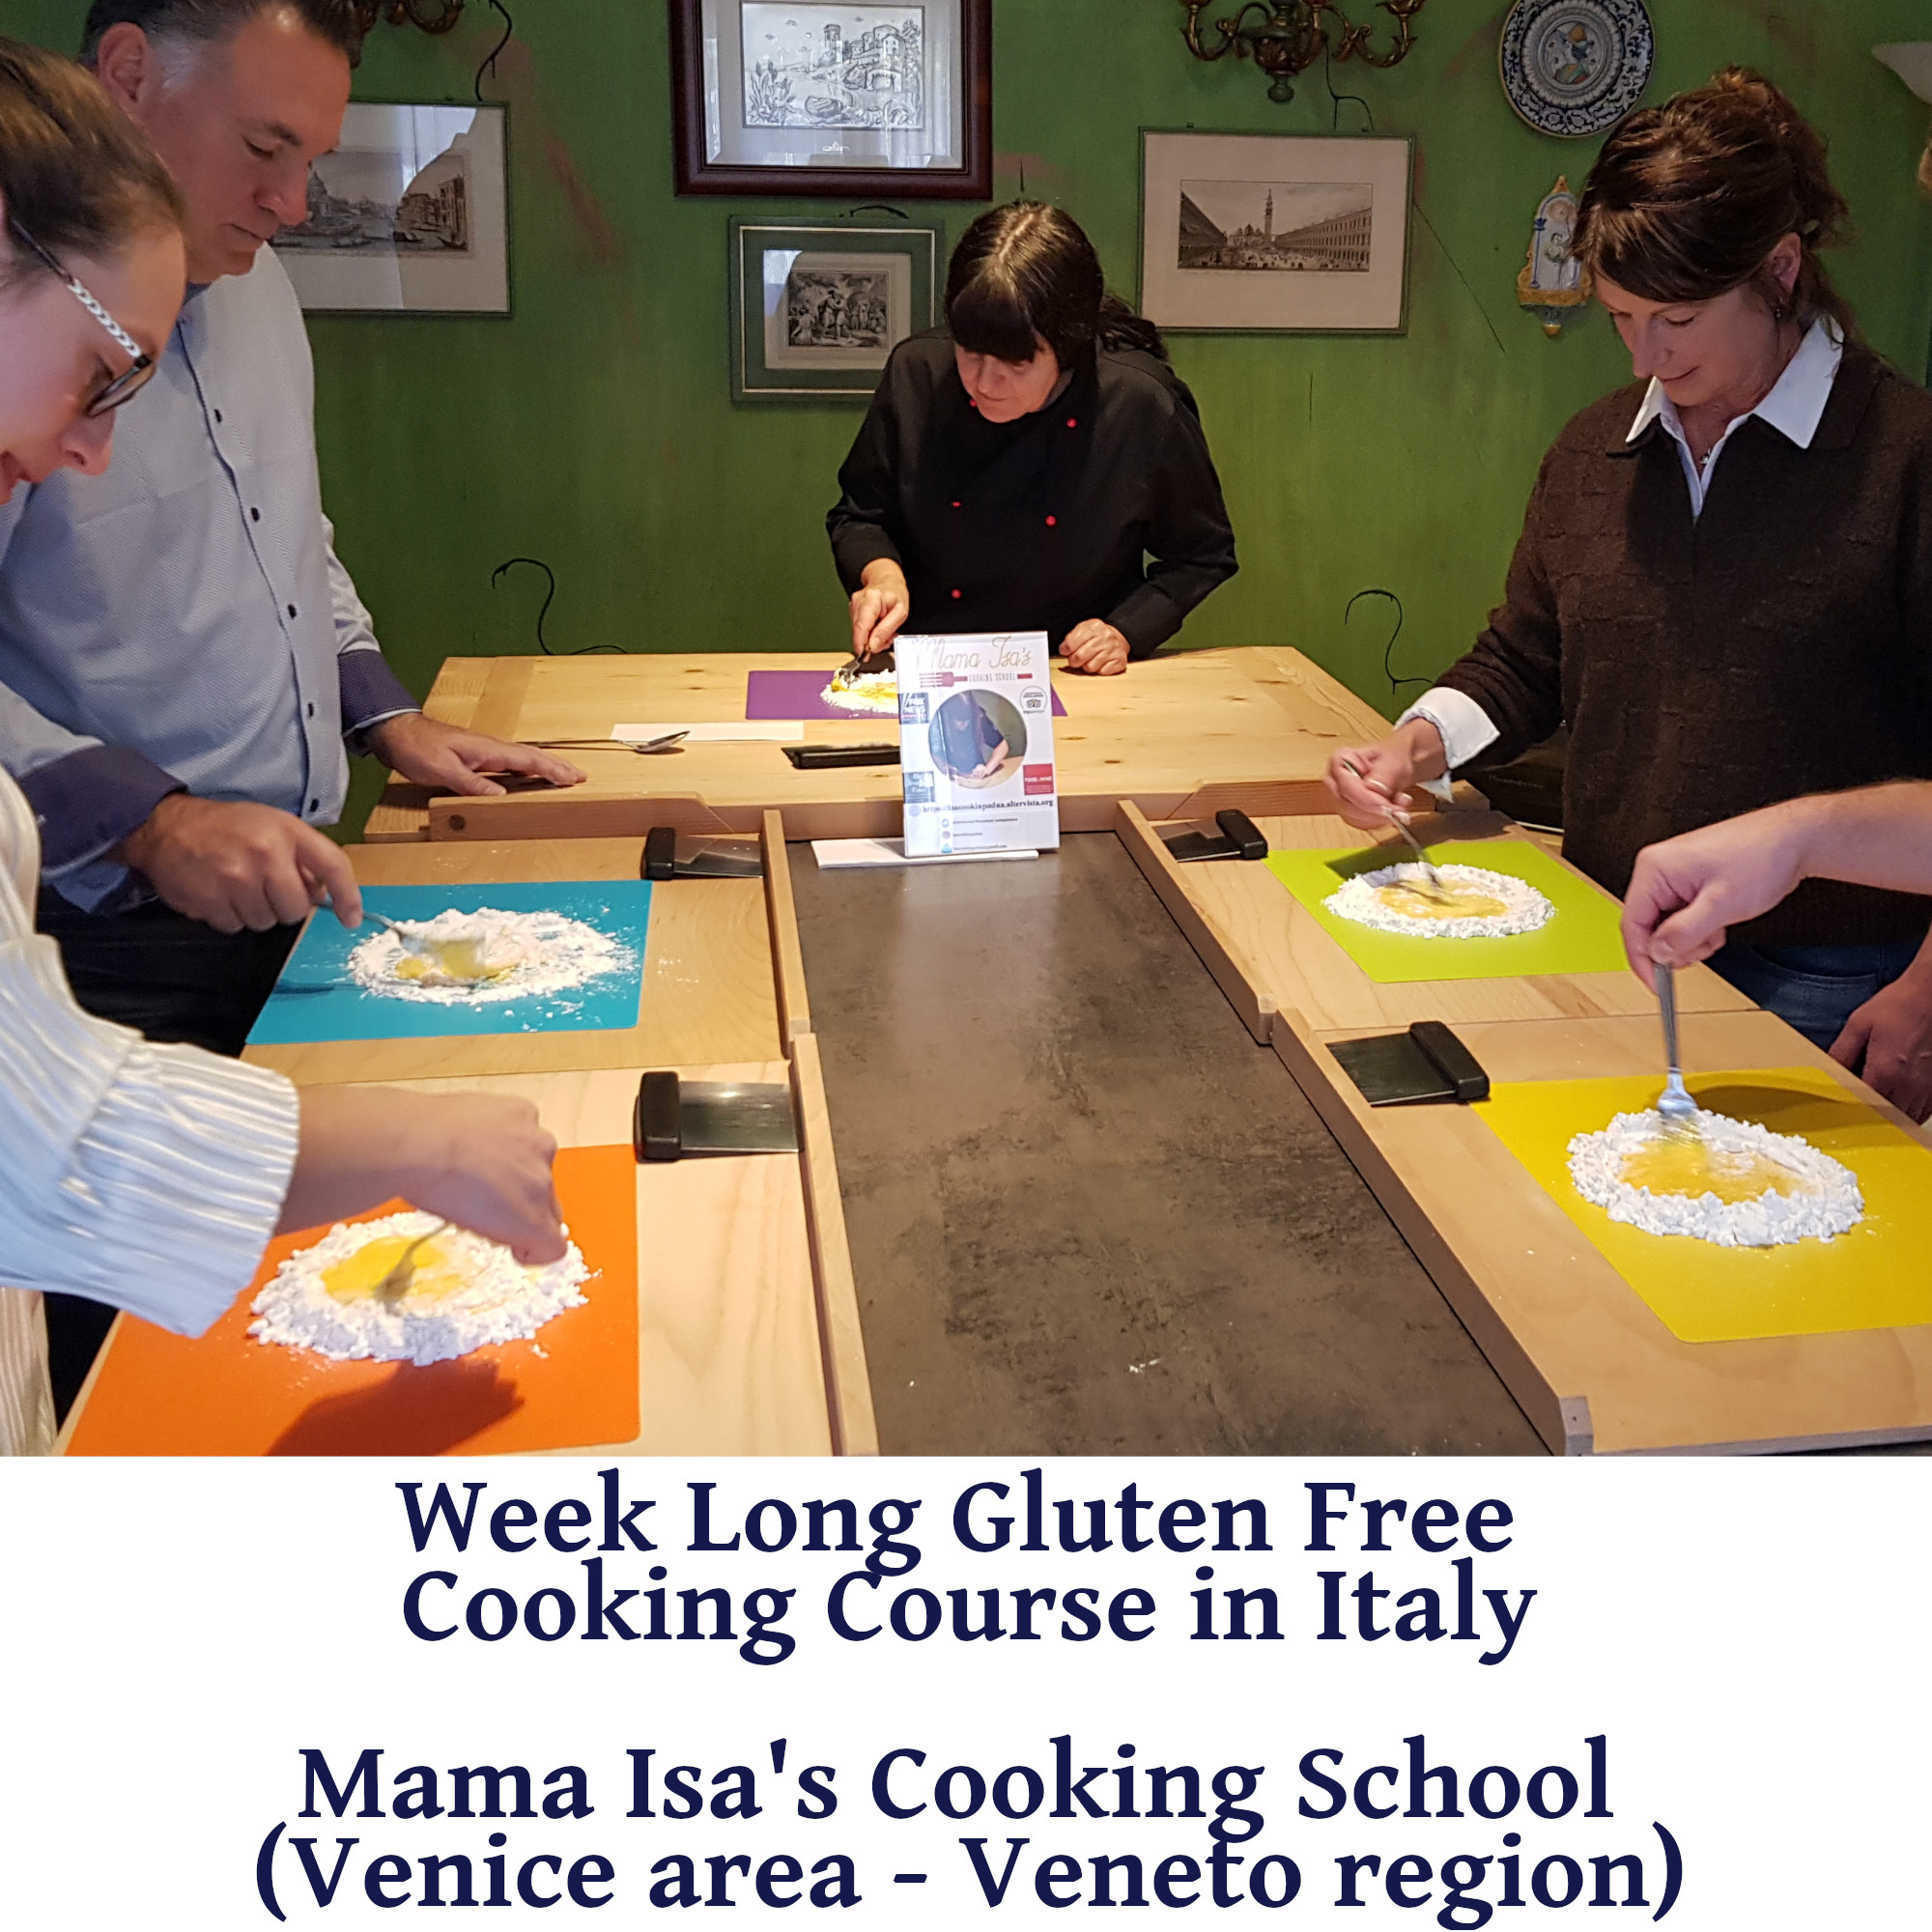 Week Long Gluten Free Cooking Course in Italy